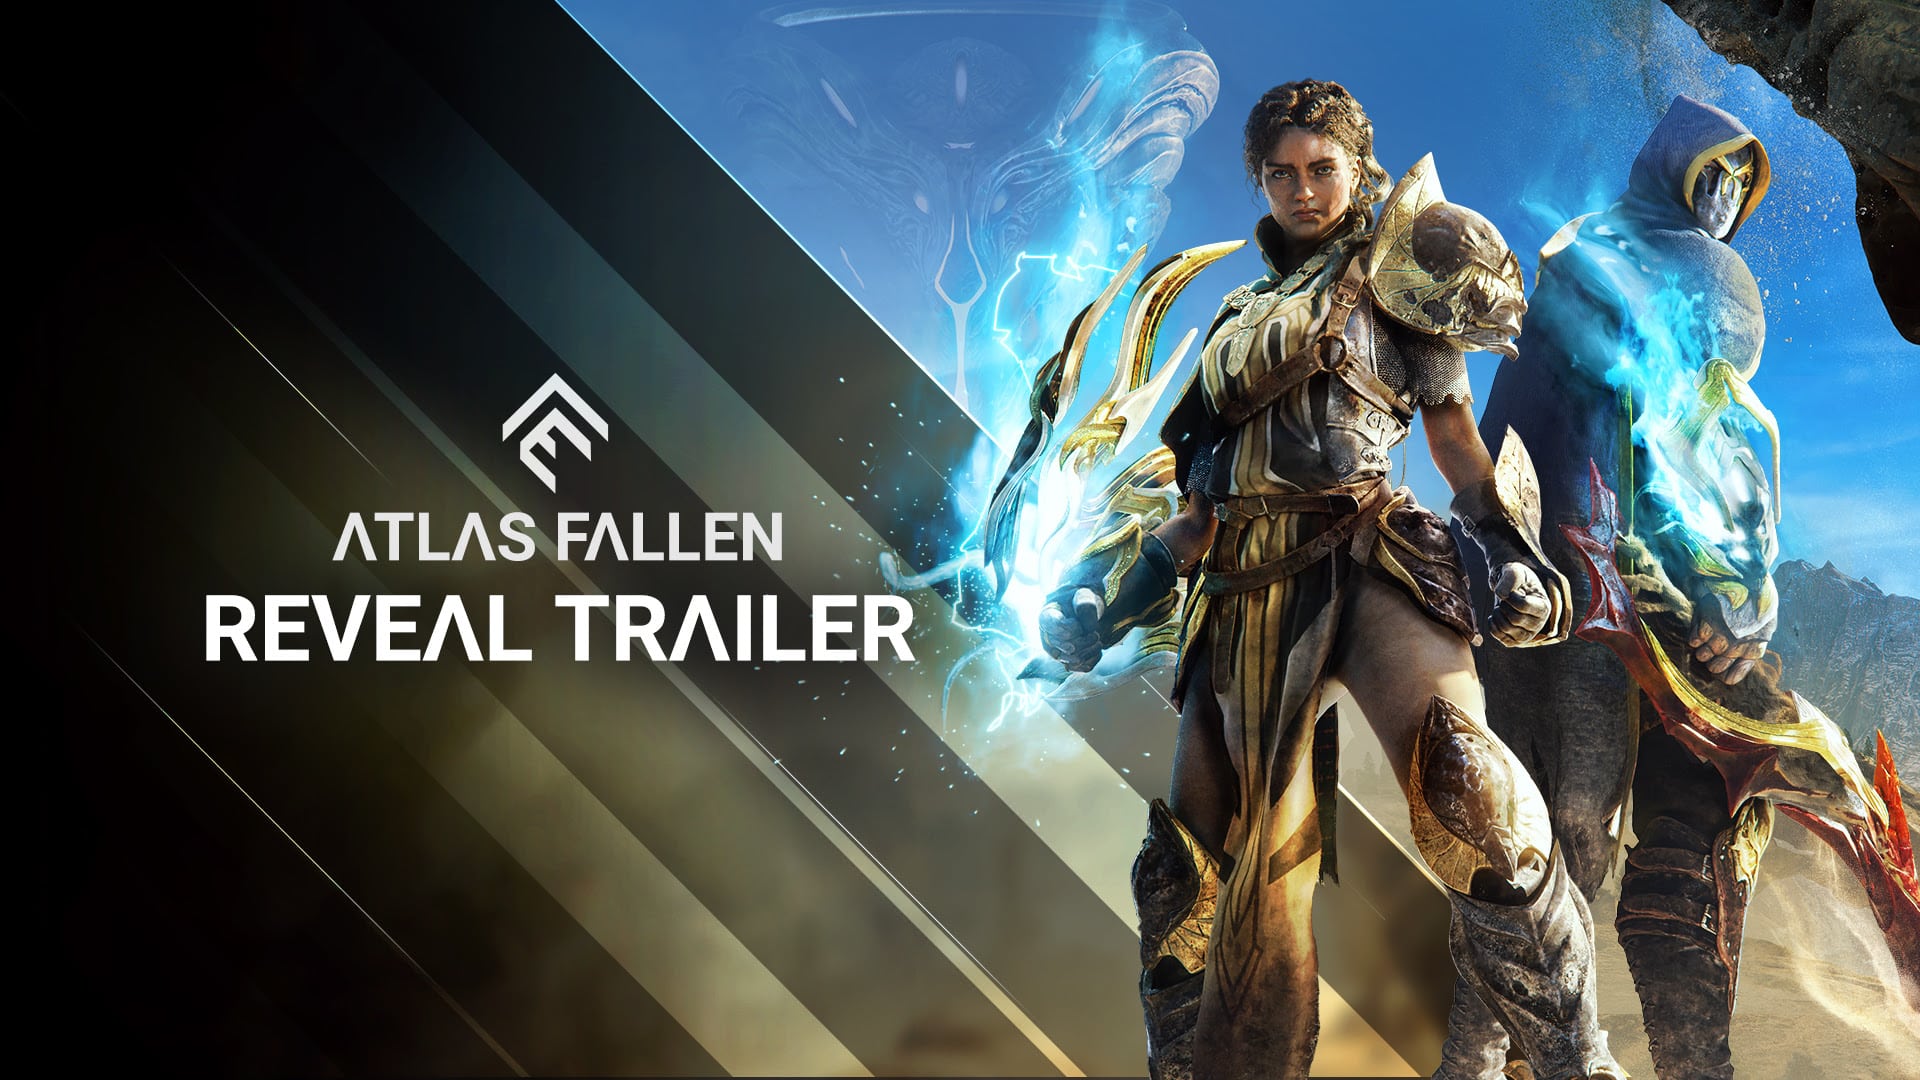 Action RPG ‘Atlas Fallen’ Announced for PS5, Xbox Series X|S & PC; Reveal Trailer